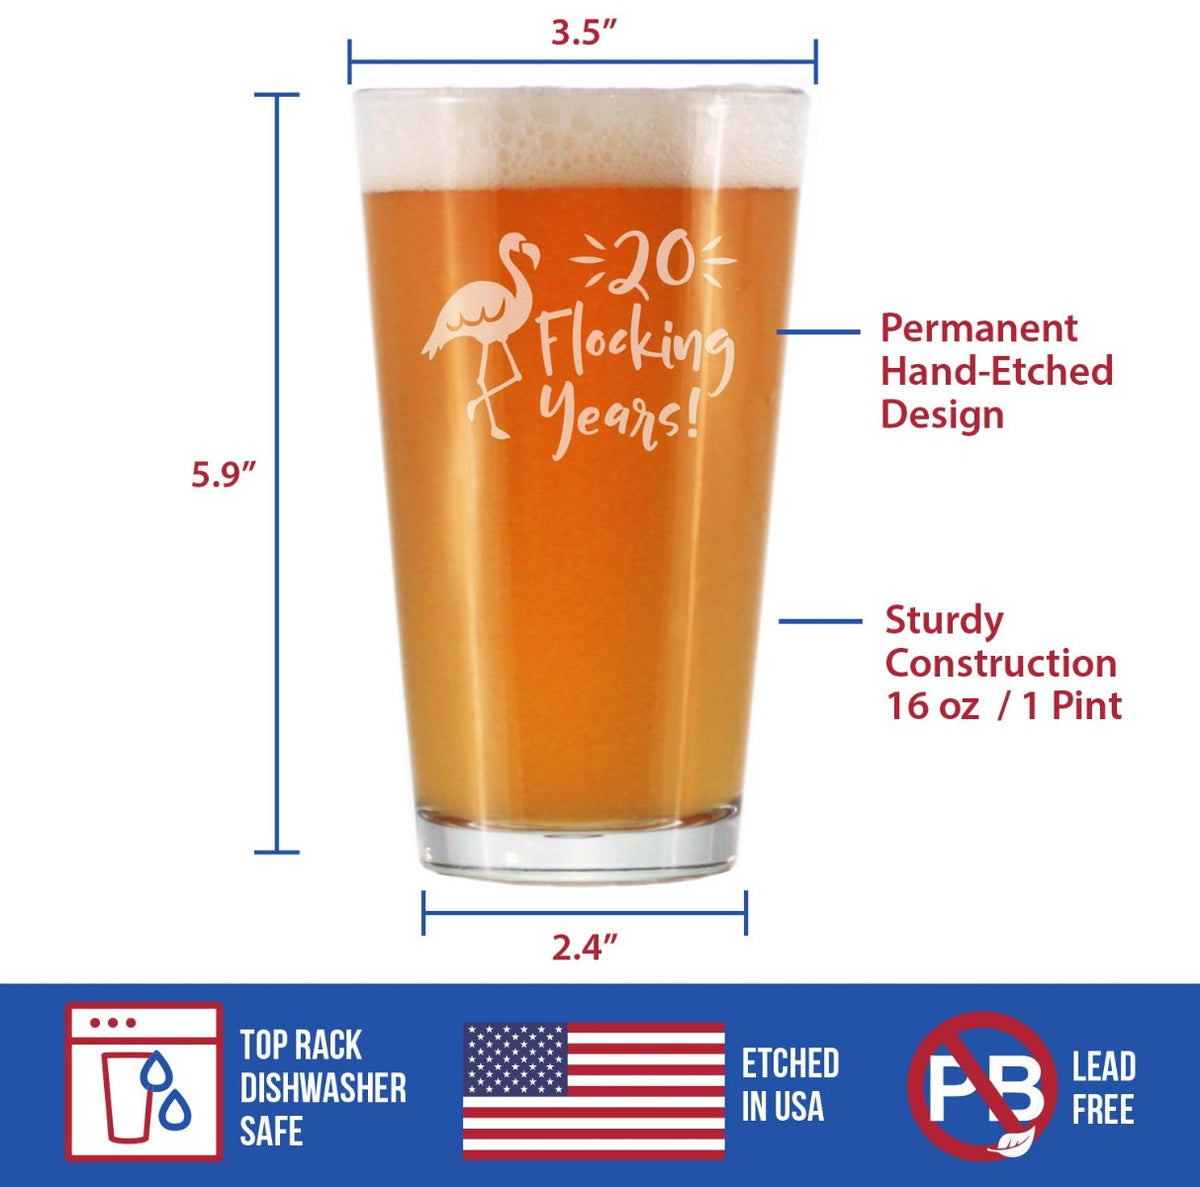 20 Flocking Years - 16 Ounce Pint Glass